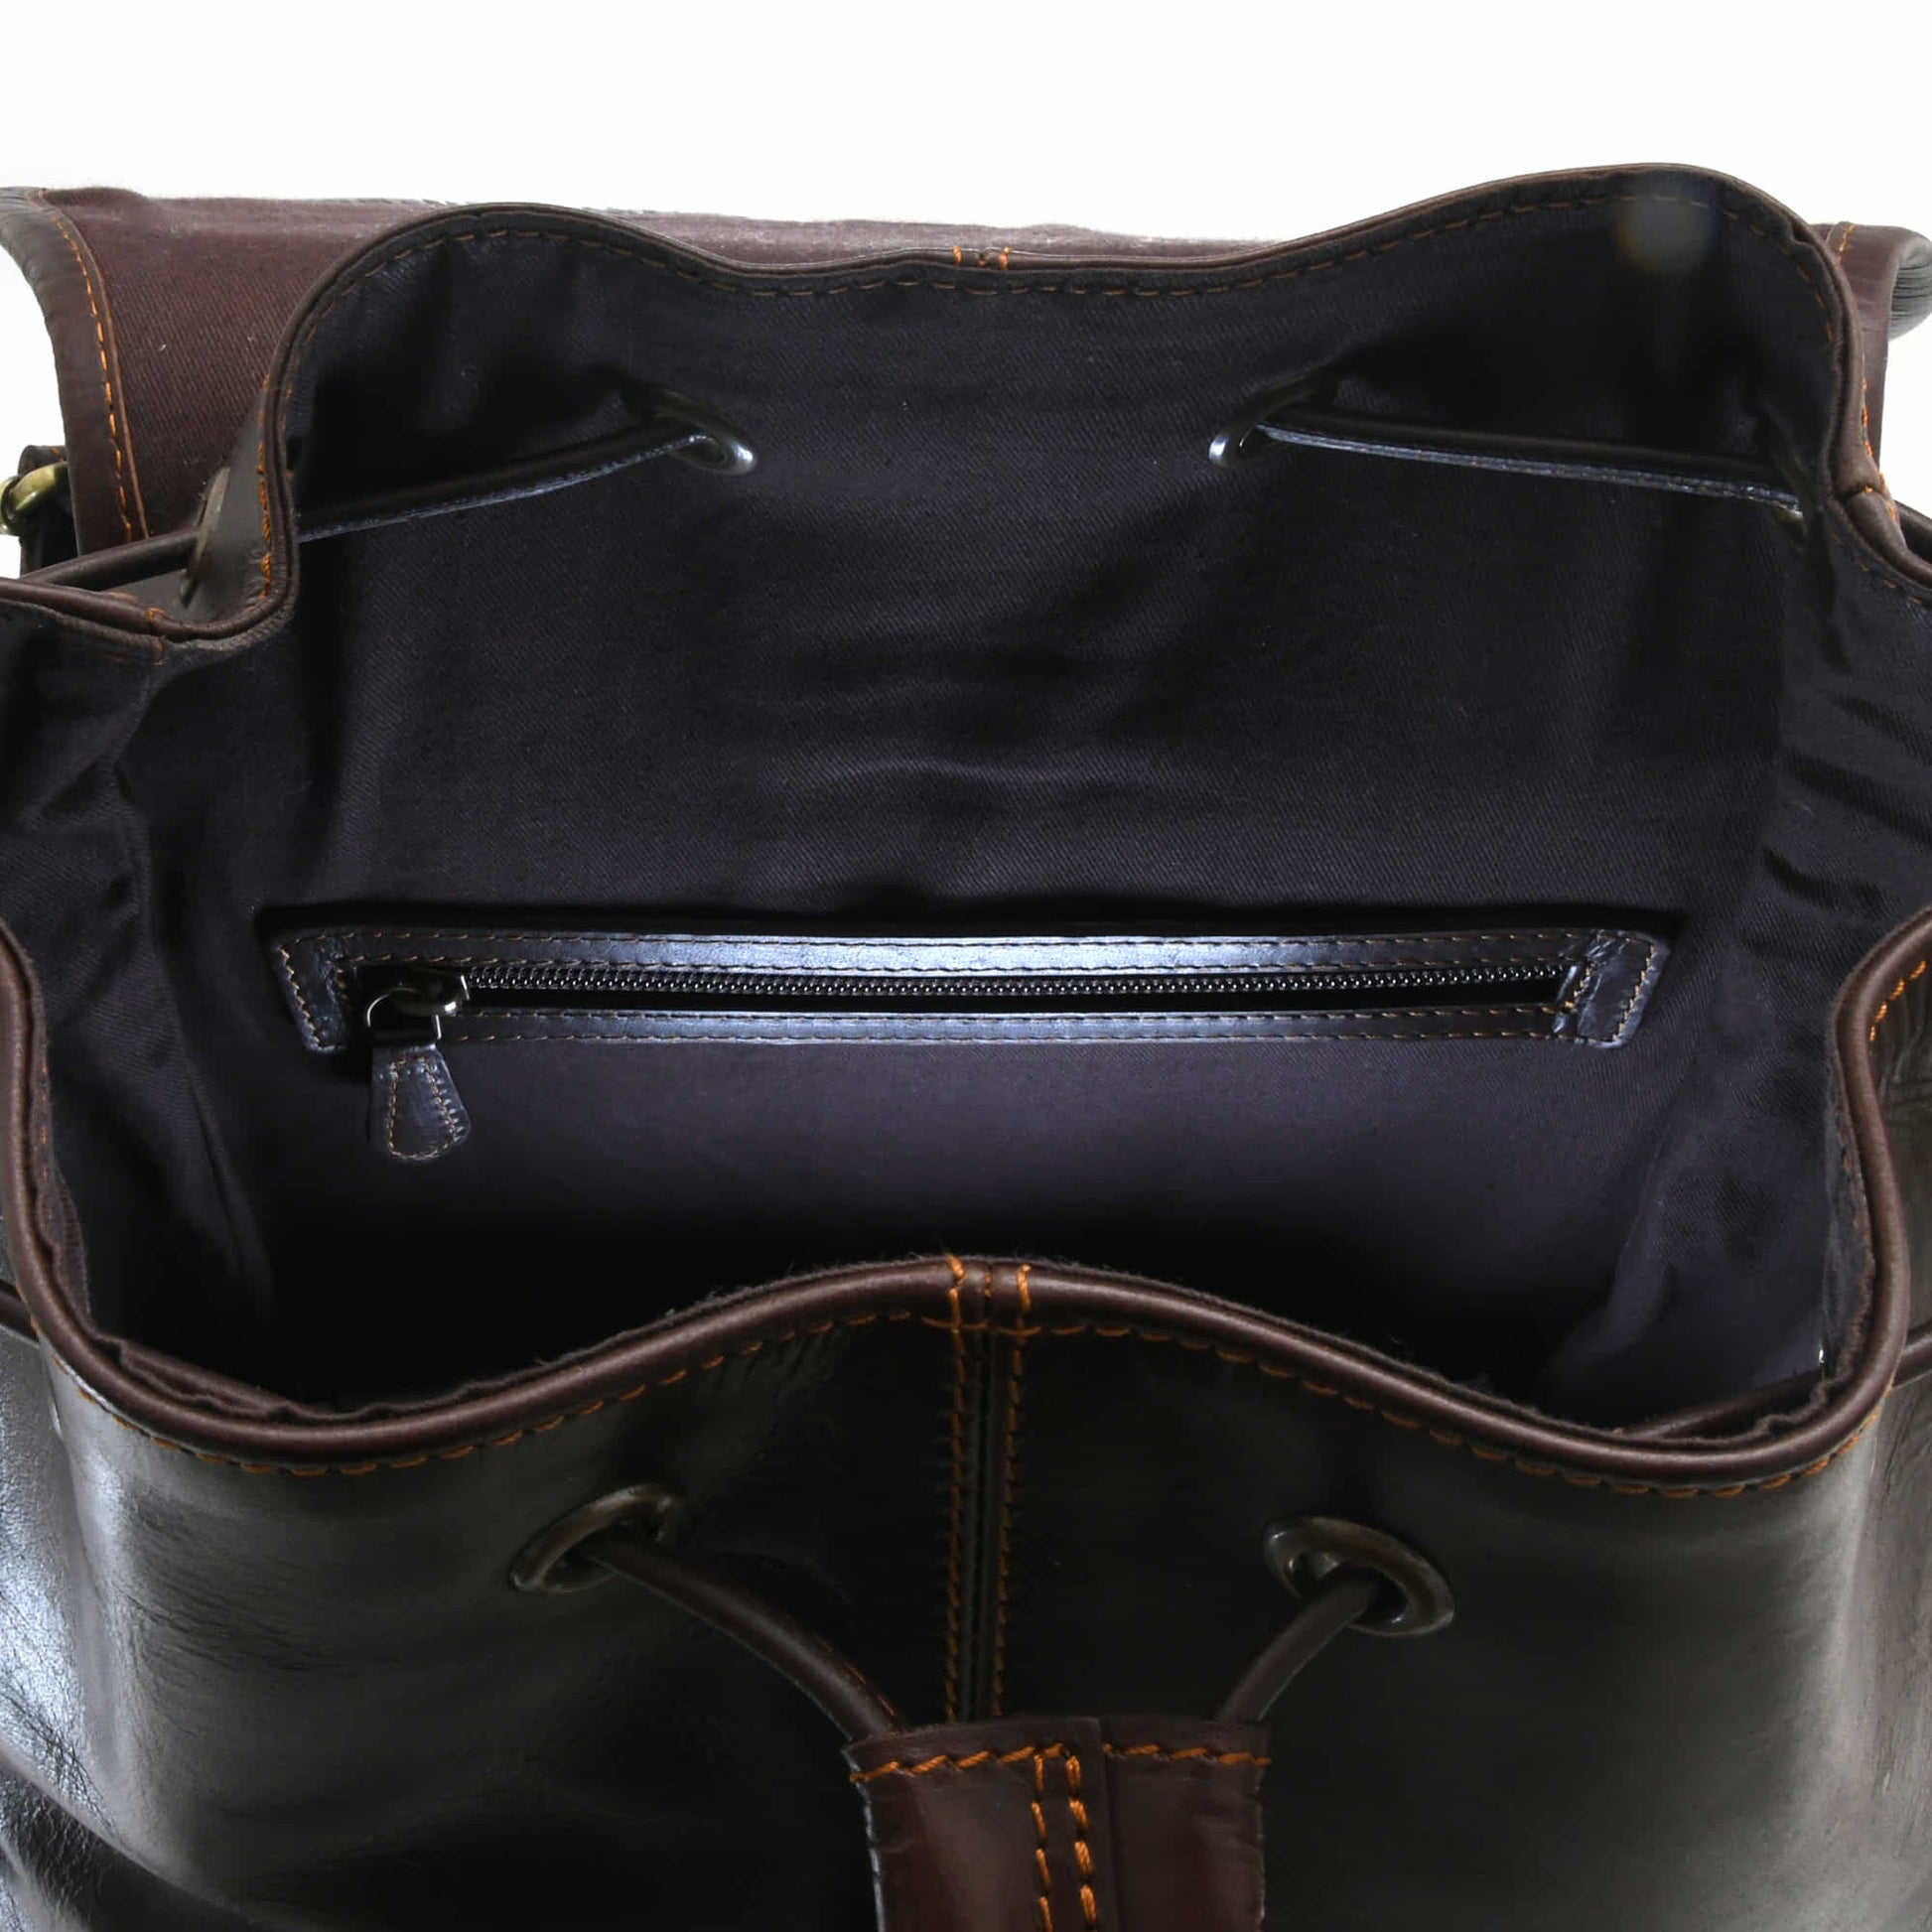 Style n Craft 392150 Backpack Large in Full Grain Dark Brown Leather - Inside View Showing the Zipper Pocket